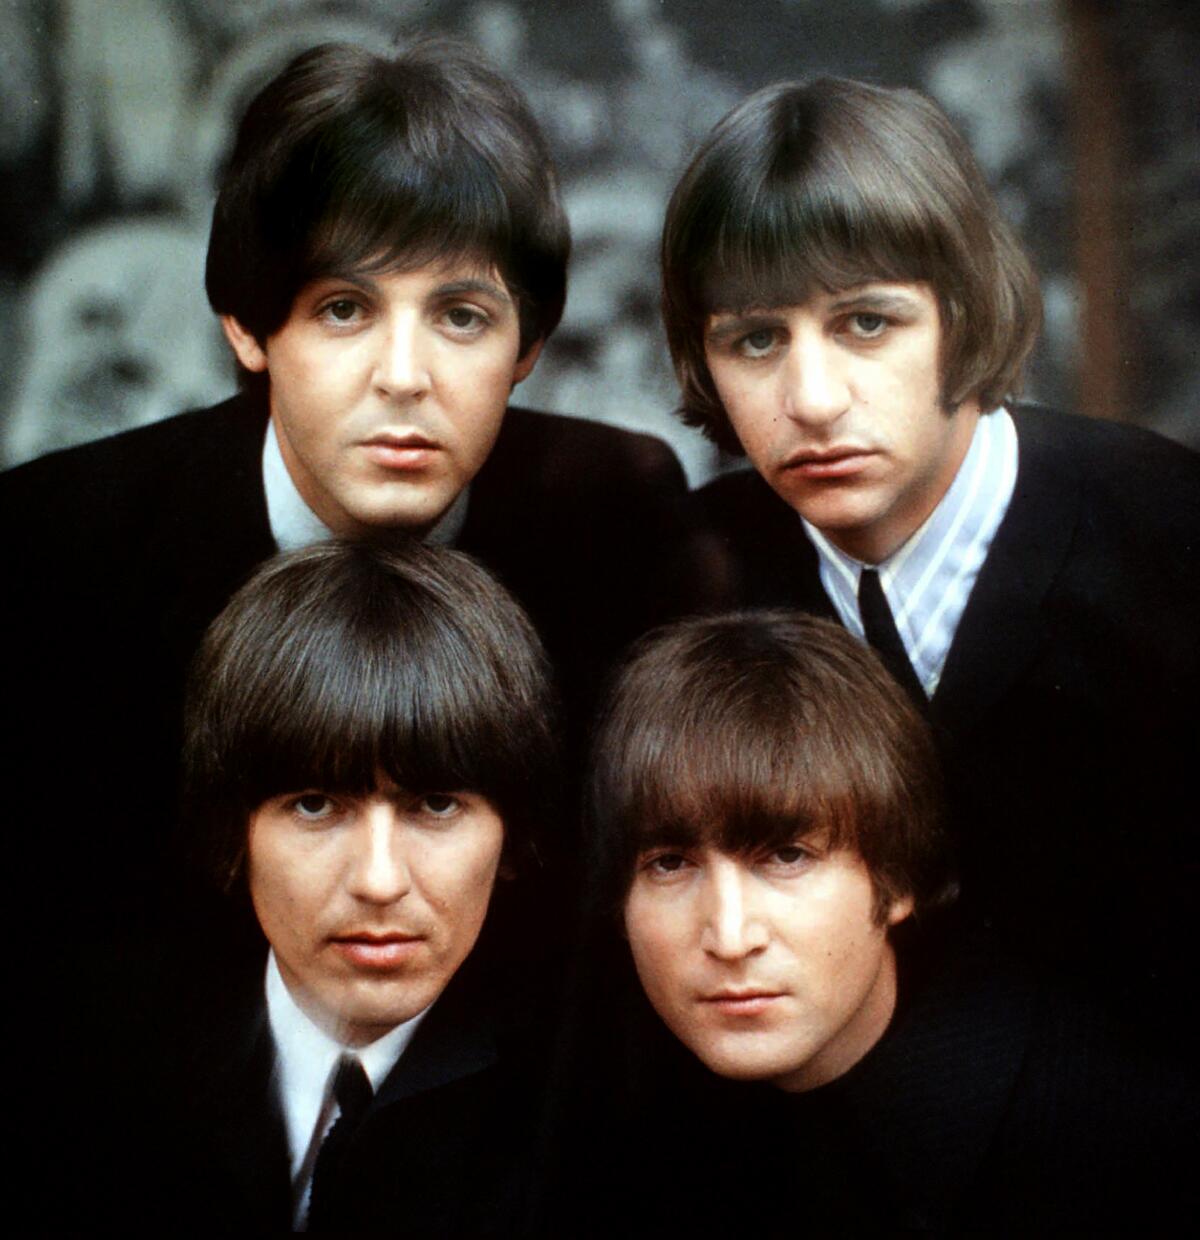 The Beatles, clockwise from top left, Paul McCartney, Ringo Starr, John Lennon, and George Harrison in 1965 in a cover shot for the British EP "Beatles for Sale No. 2" by Robert Freeman.